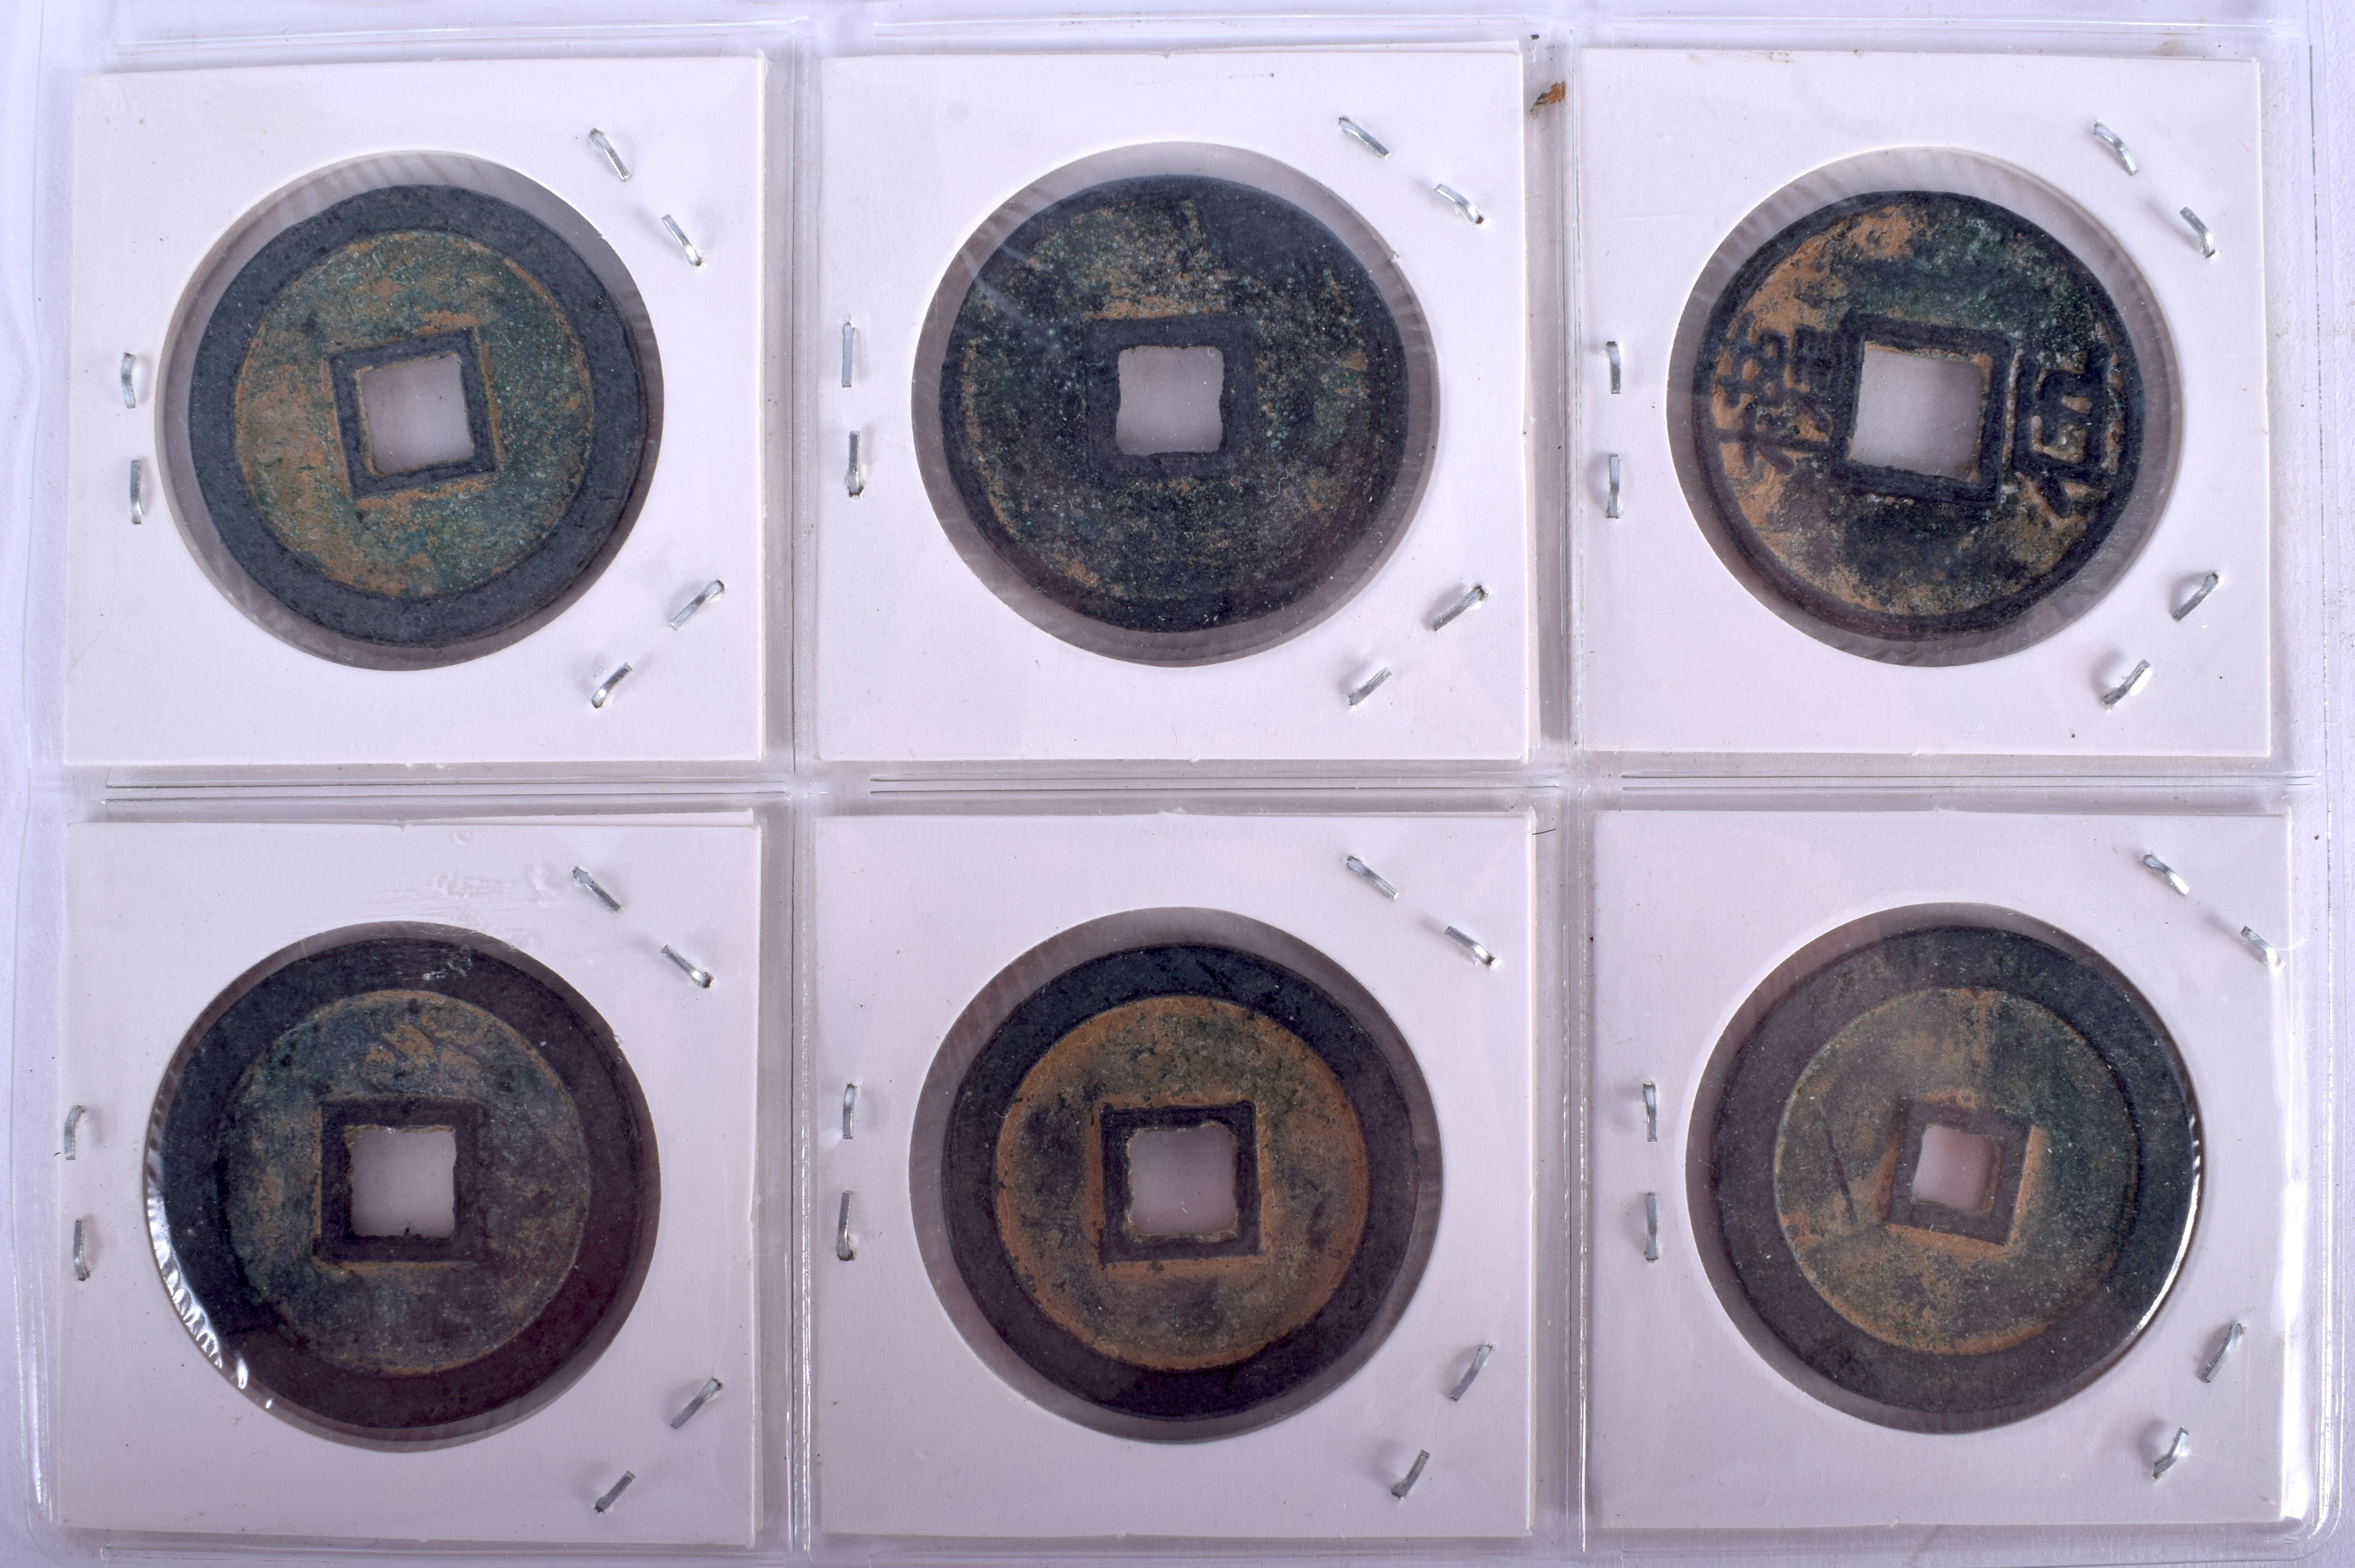 SIX CHINESE COINS 20th Century. (6)